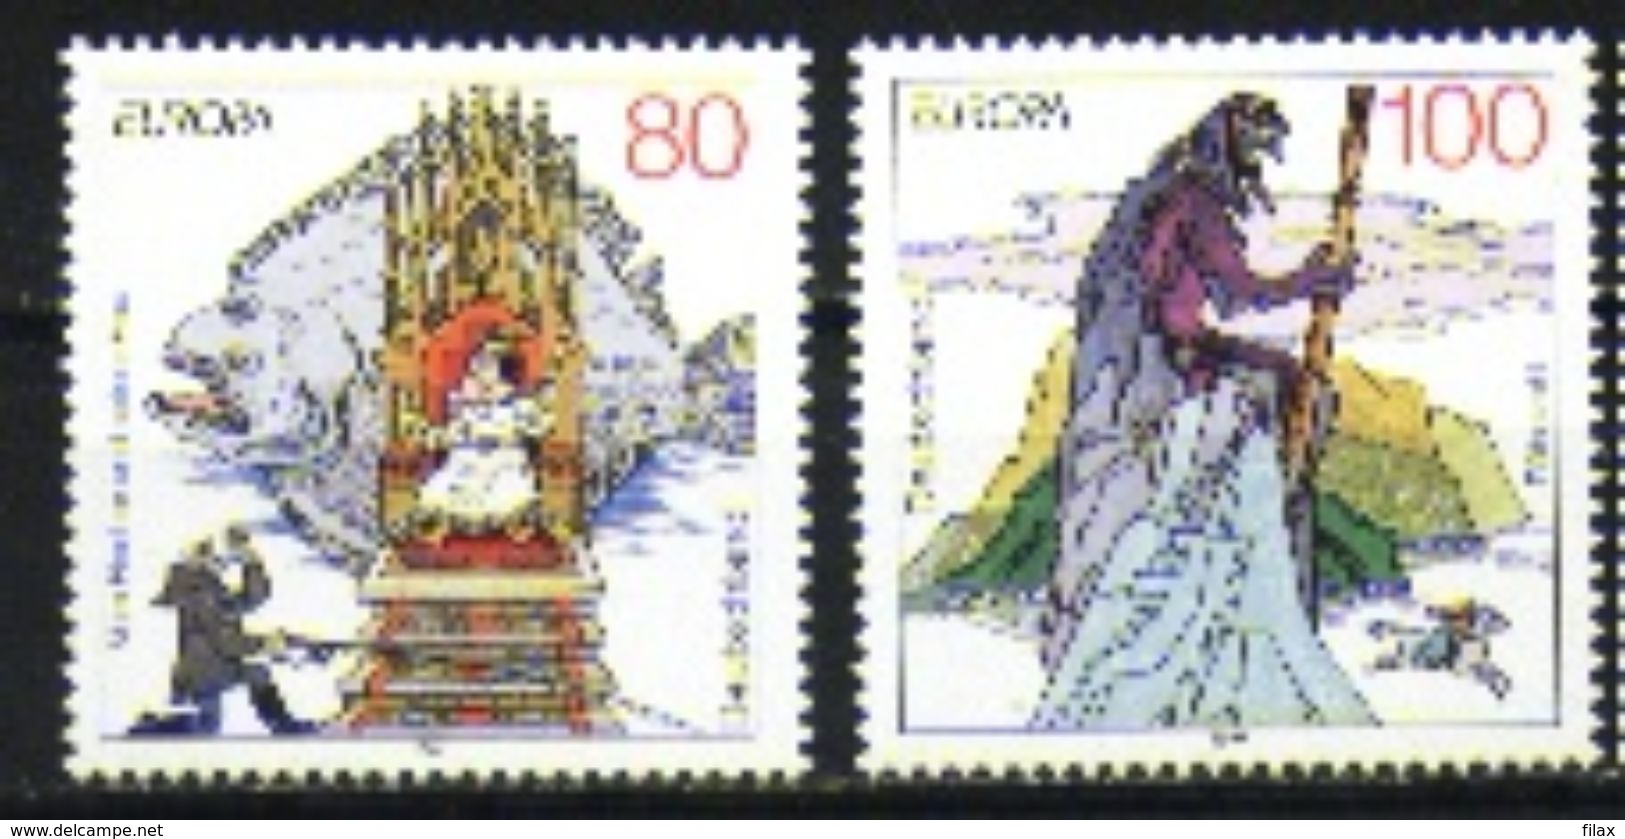 LOT EU01  - EUROPA (Different years) - Germany